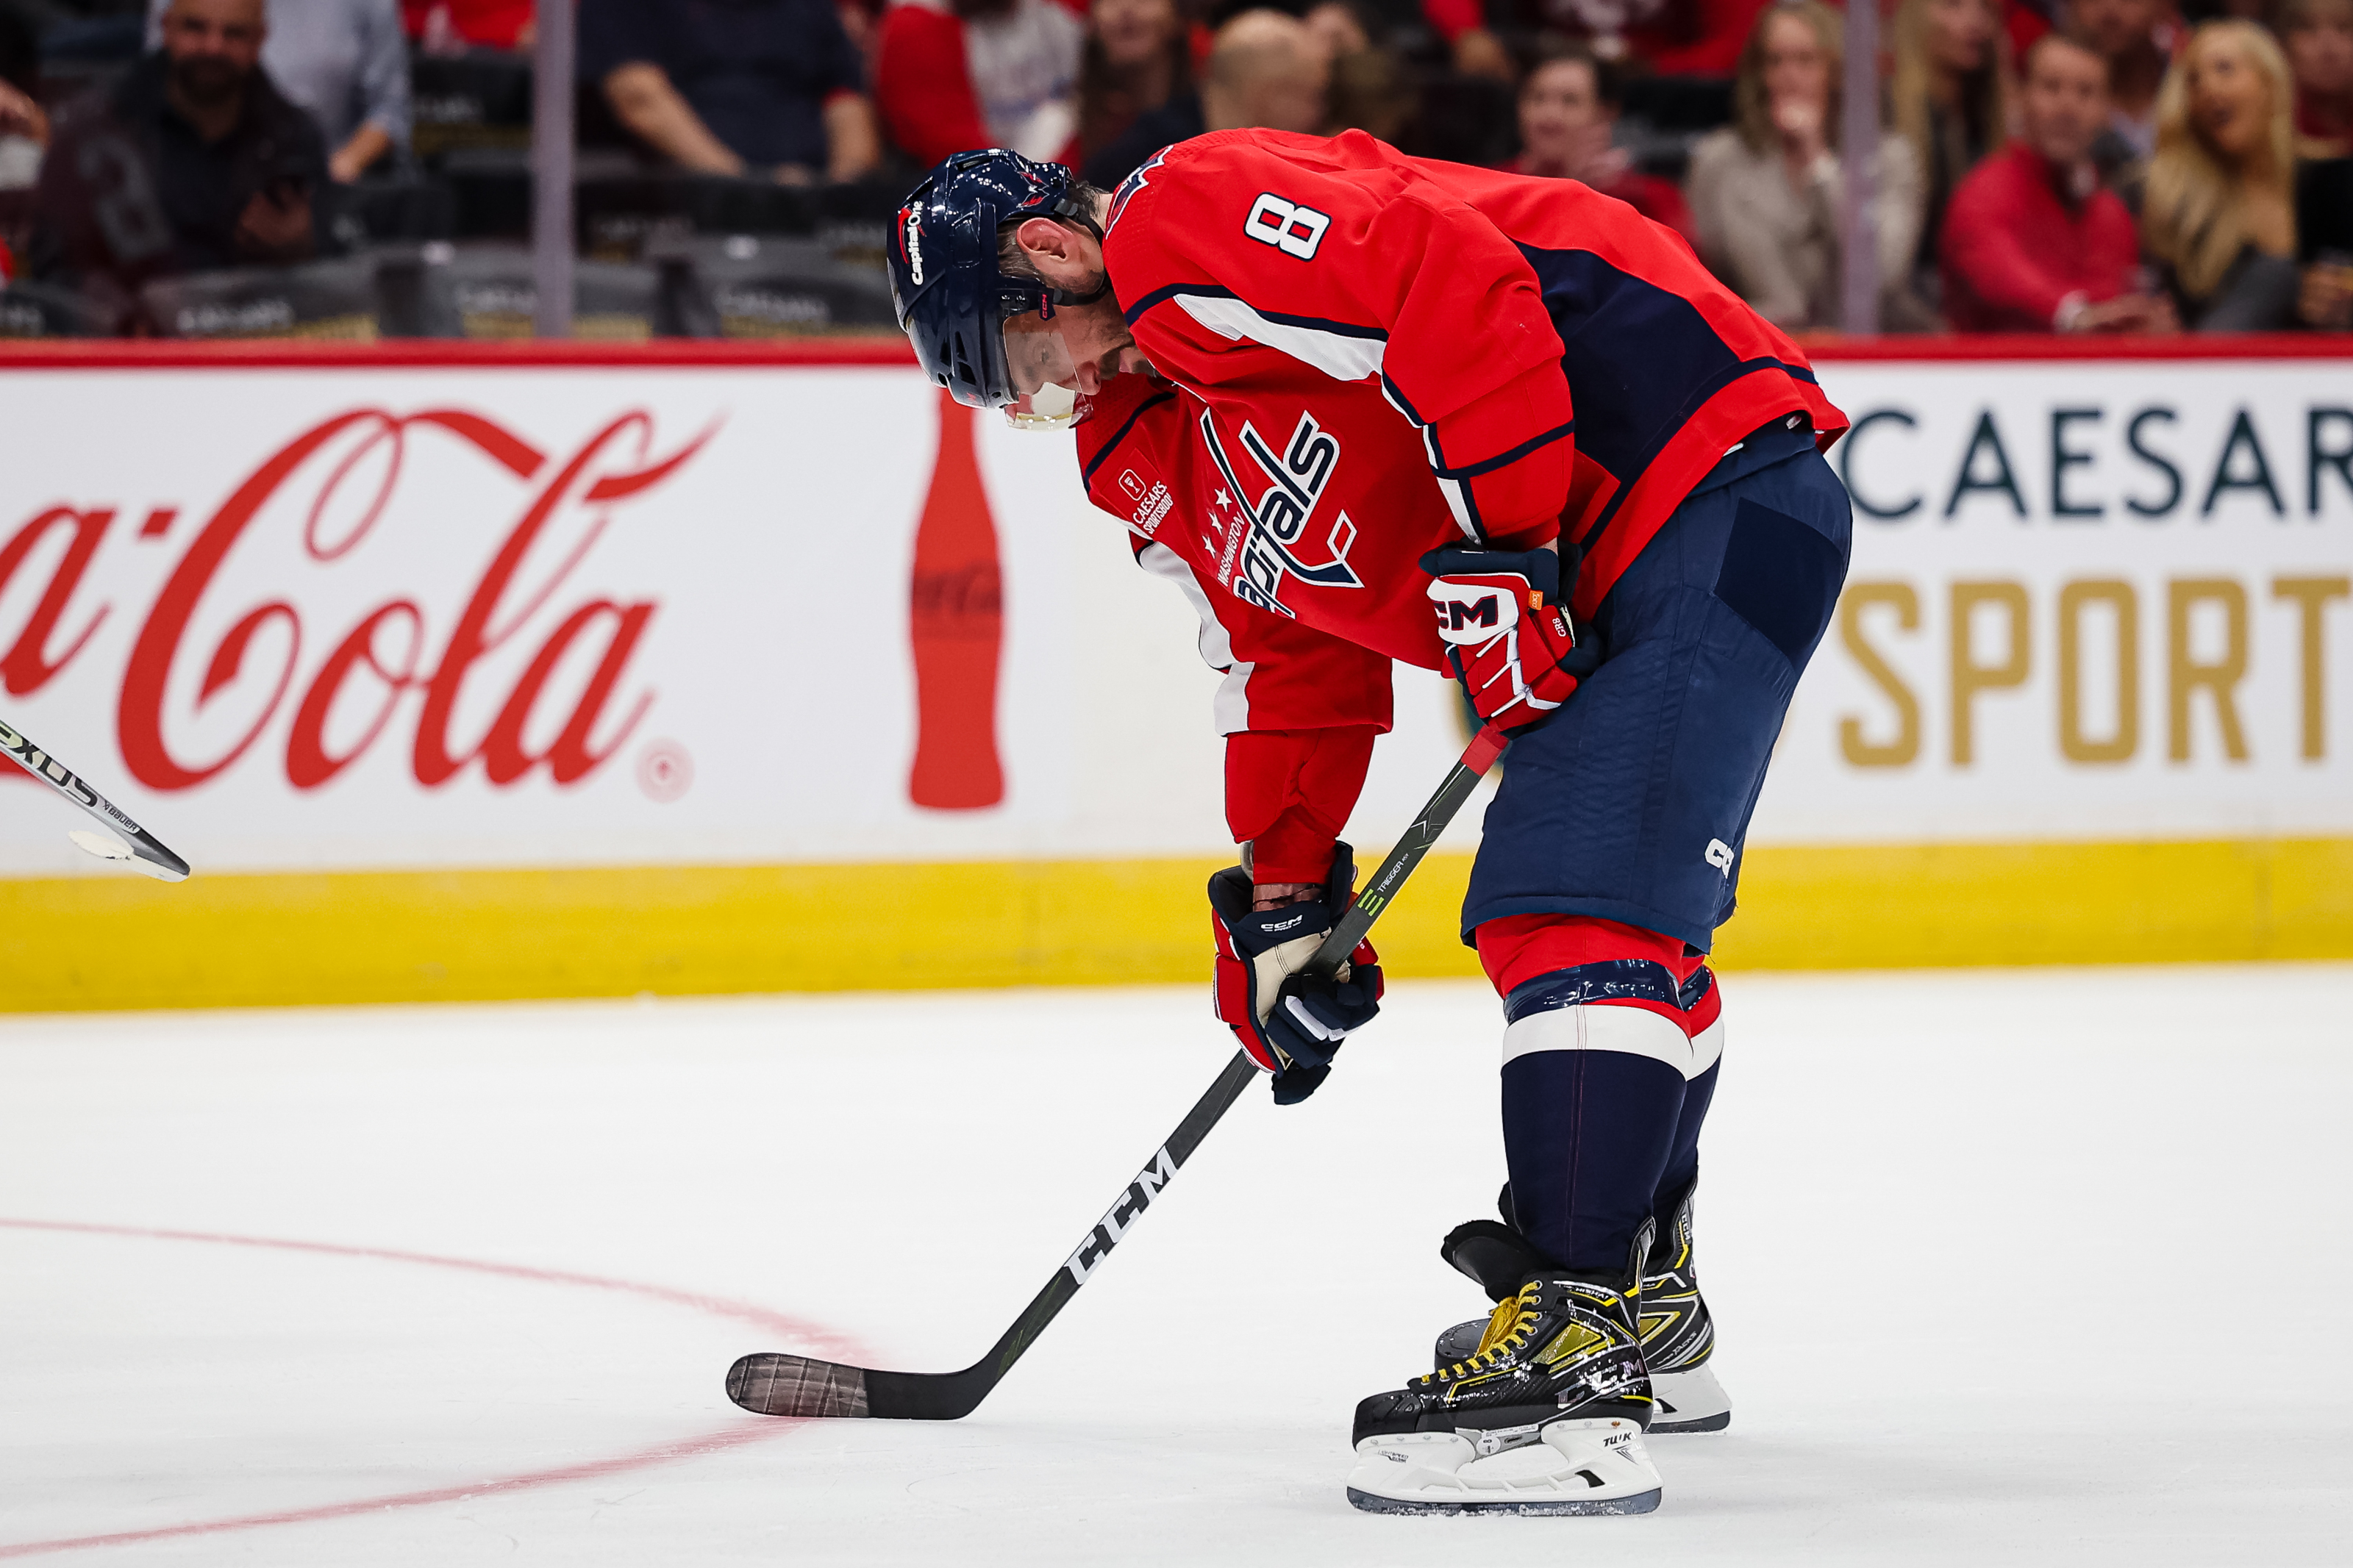 Alex Ovechkin isn't the only pro athlete looking to break a record